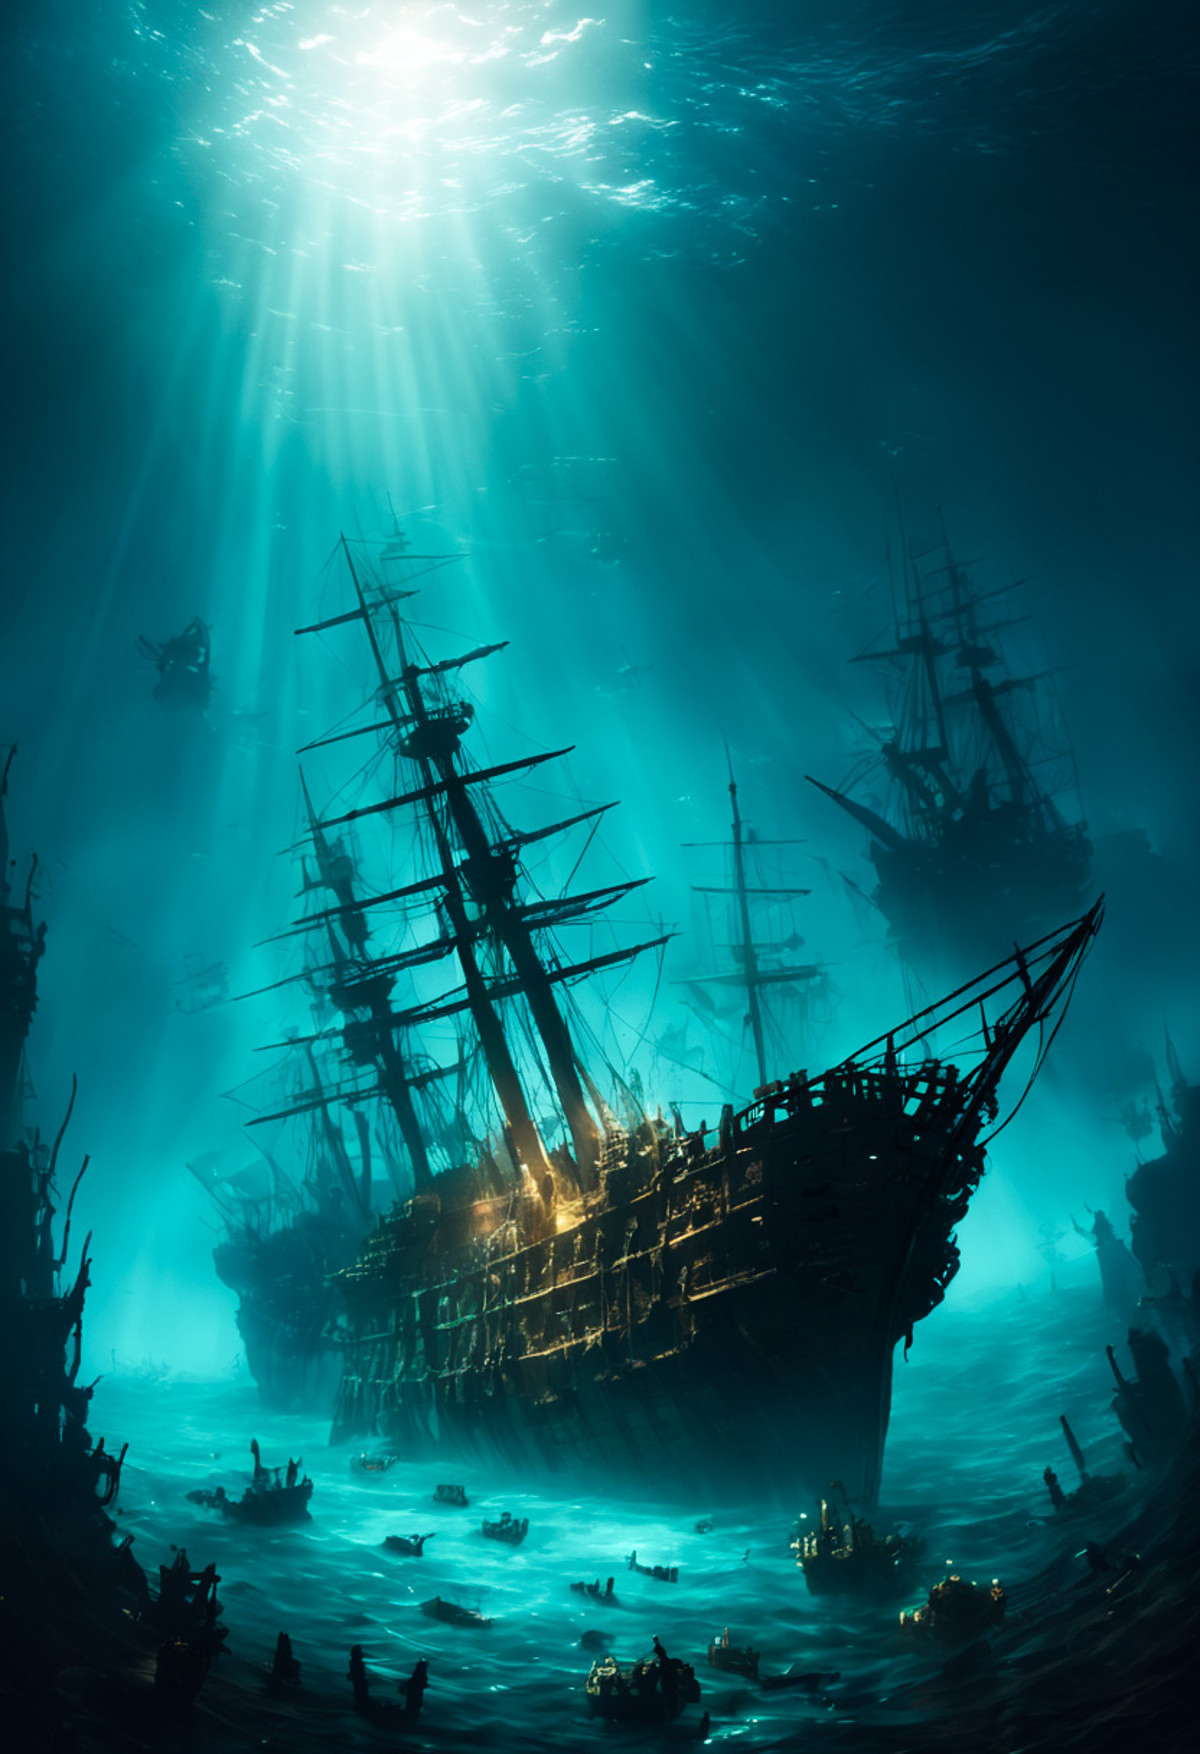 concept art A haunting image of an undersea graveyard of ships from different eras, their final resting place illuminated ...